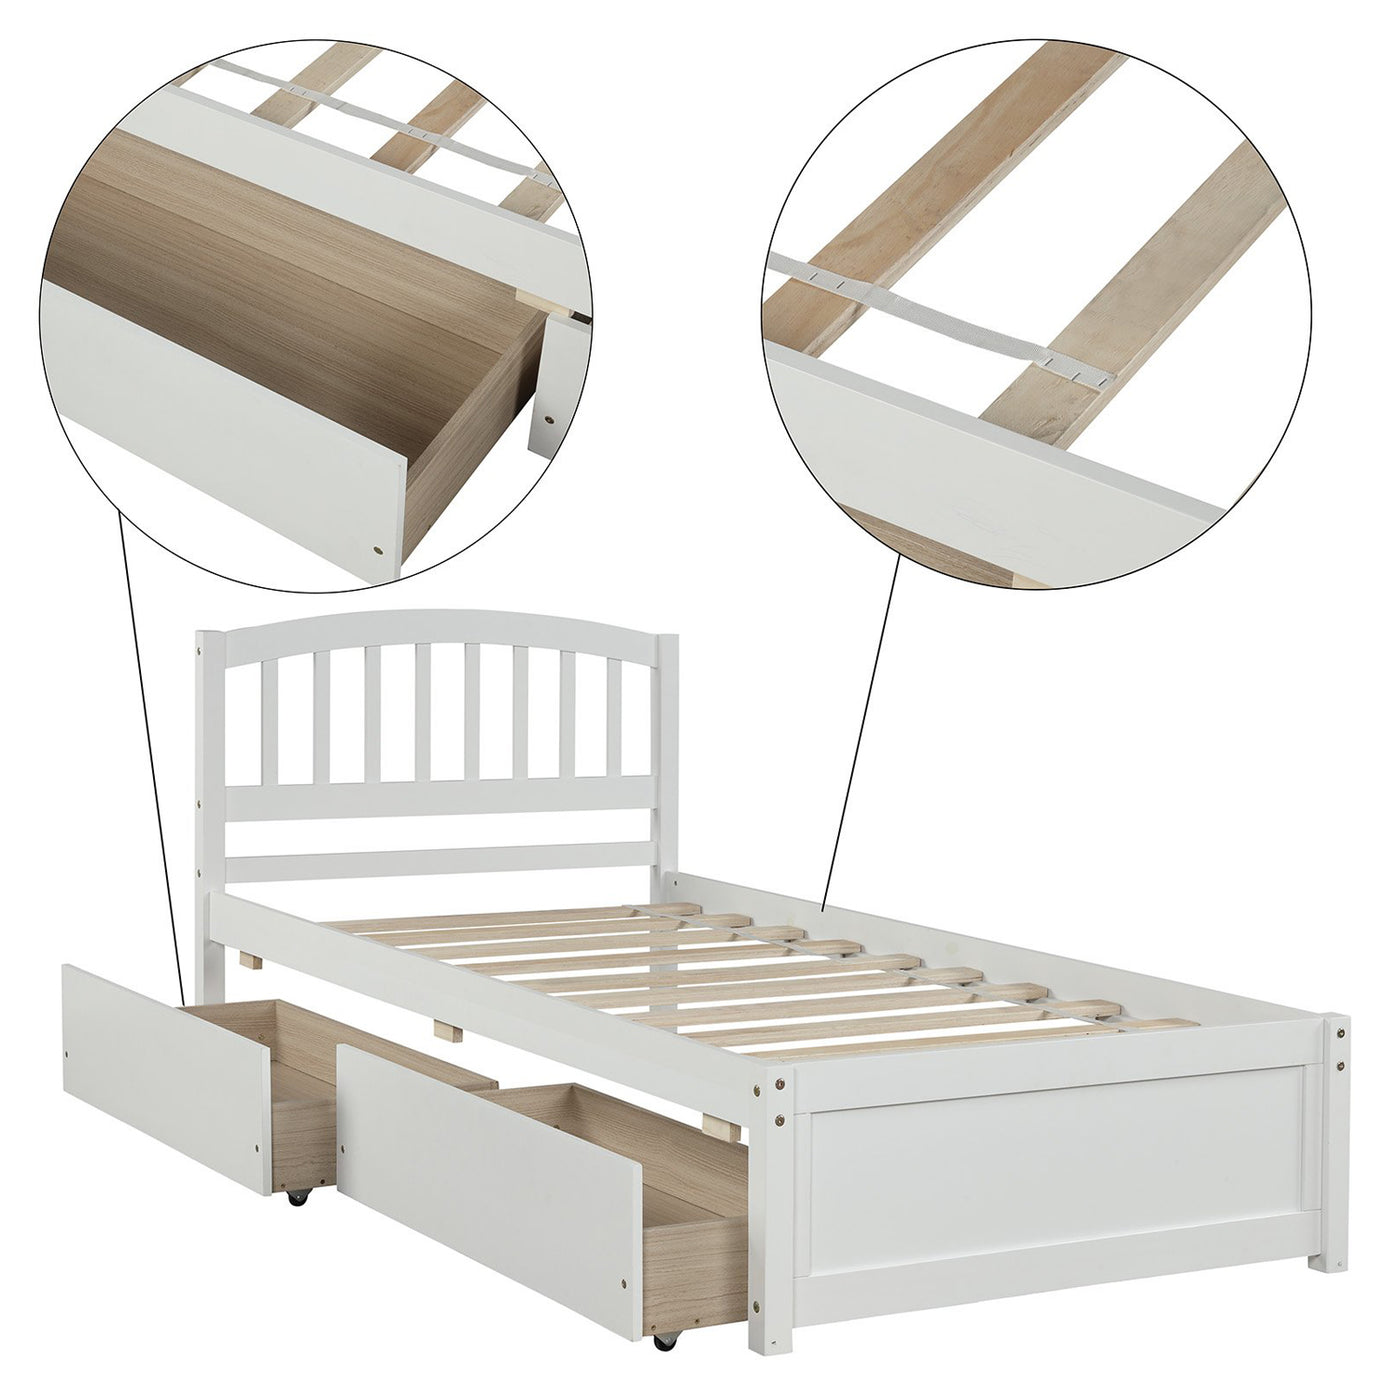 Twin Bed Frame with Headboard and Storage Drawers Platform Mattress Foundation